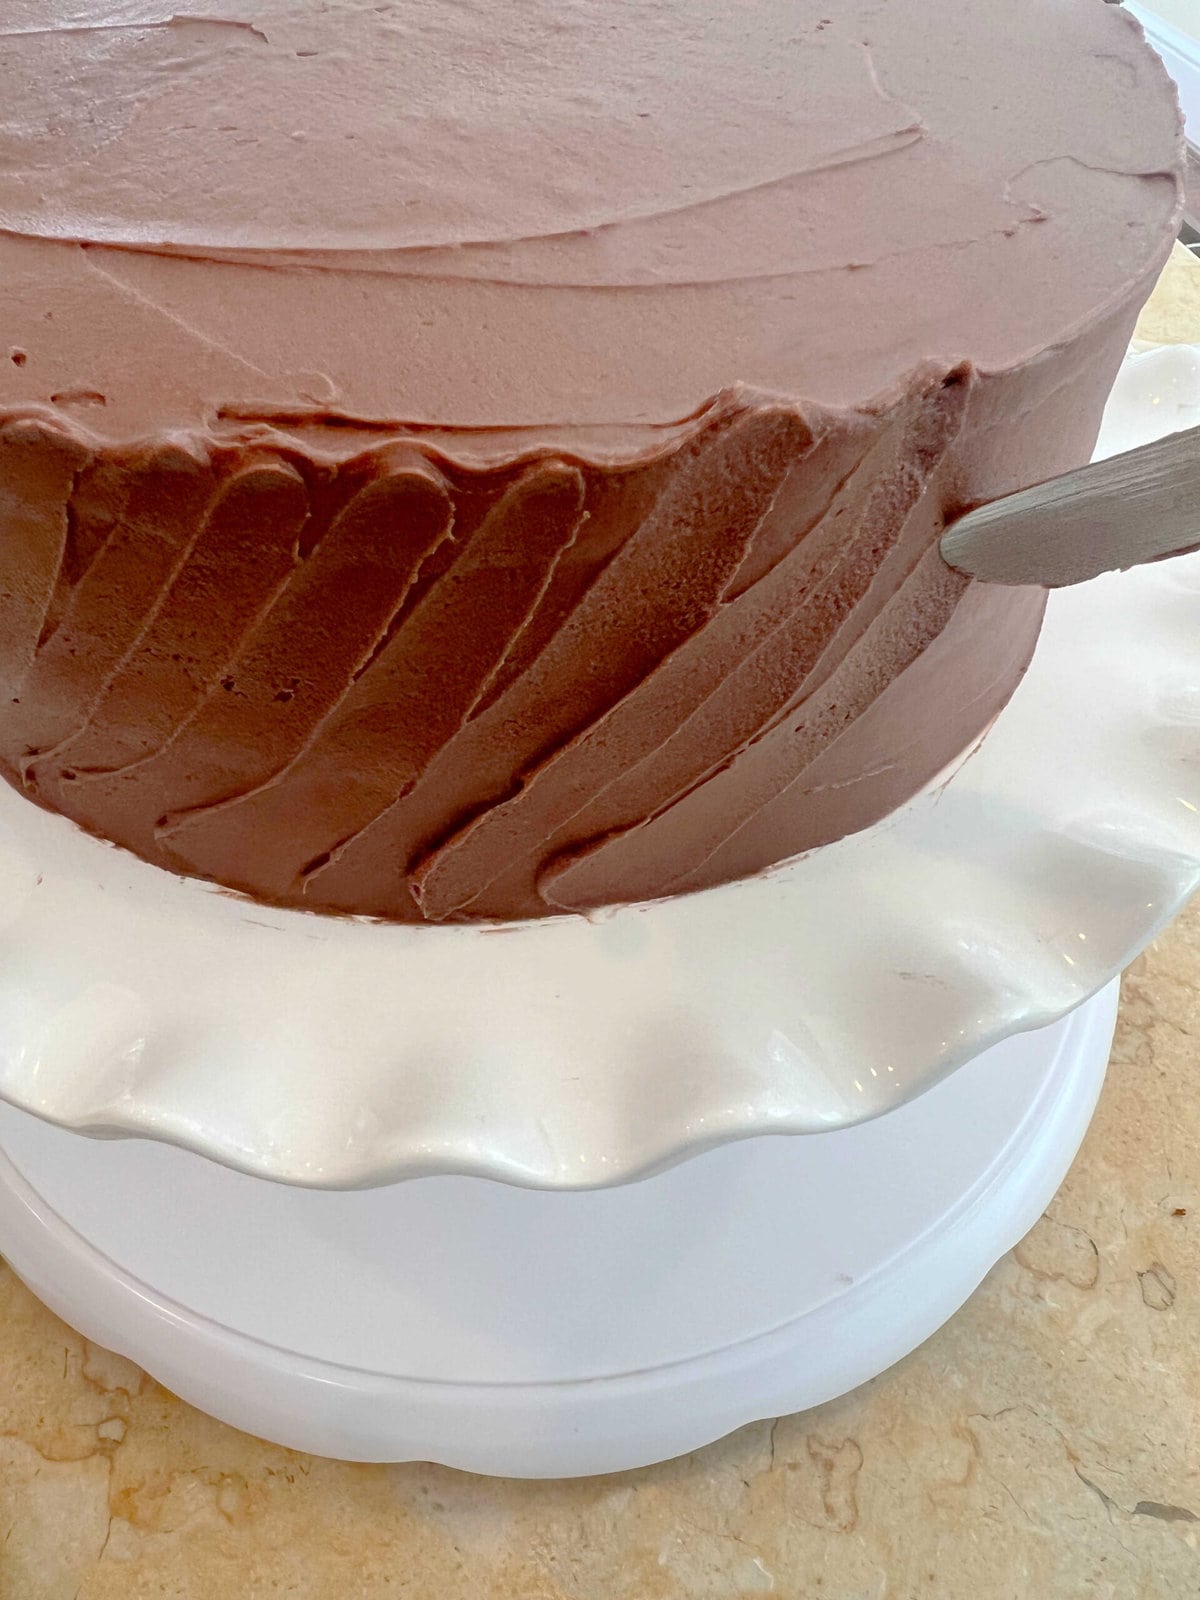 Adding texture to the frosted cake with an offset spatula.